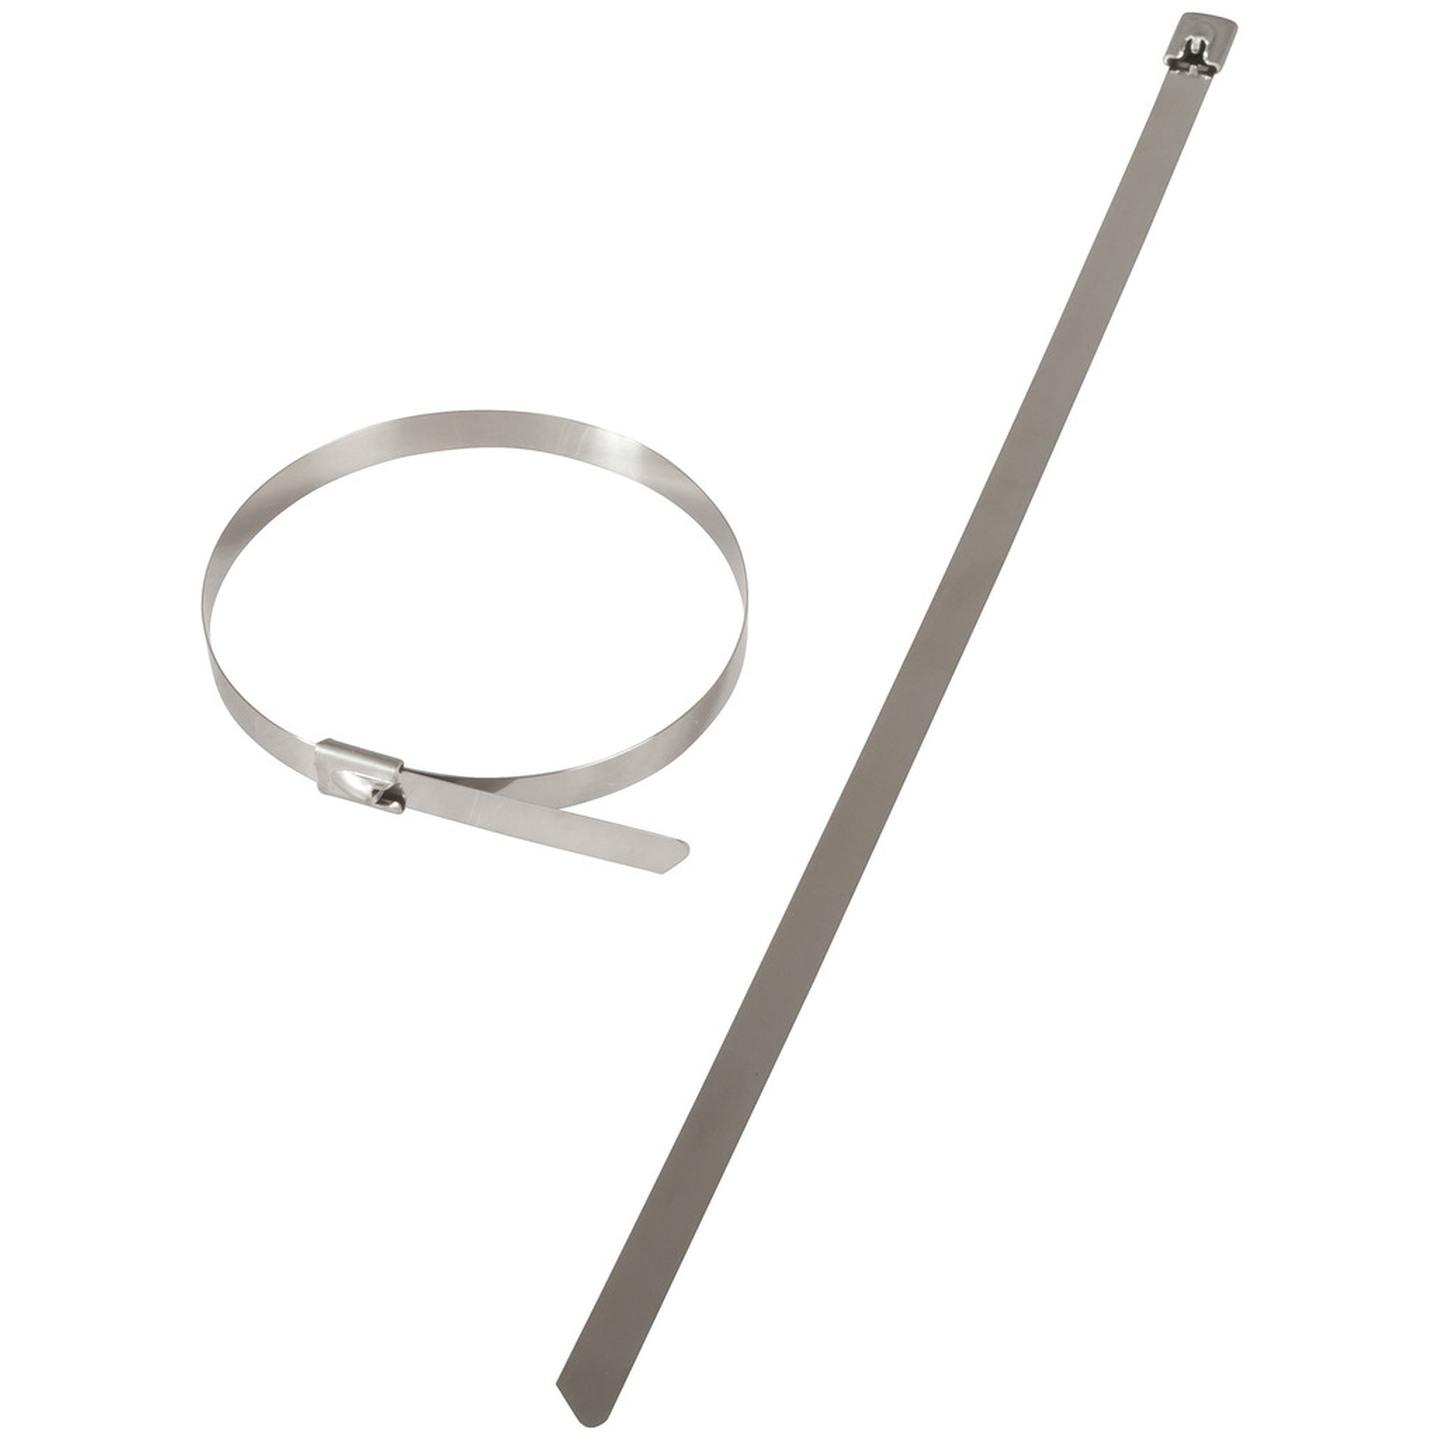 520 x 7.9mm Stainless Steel Cable Ties - 10 Pack